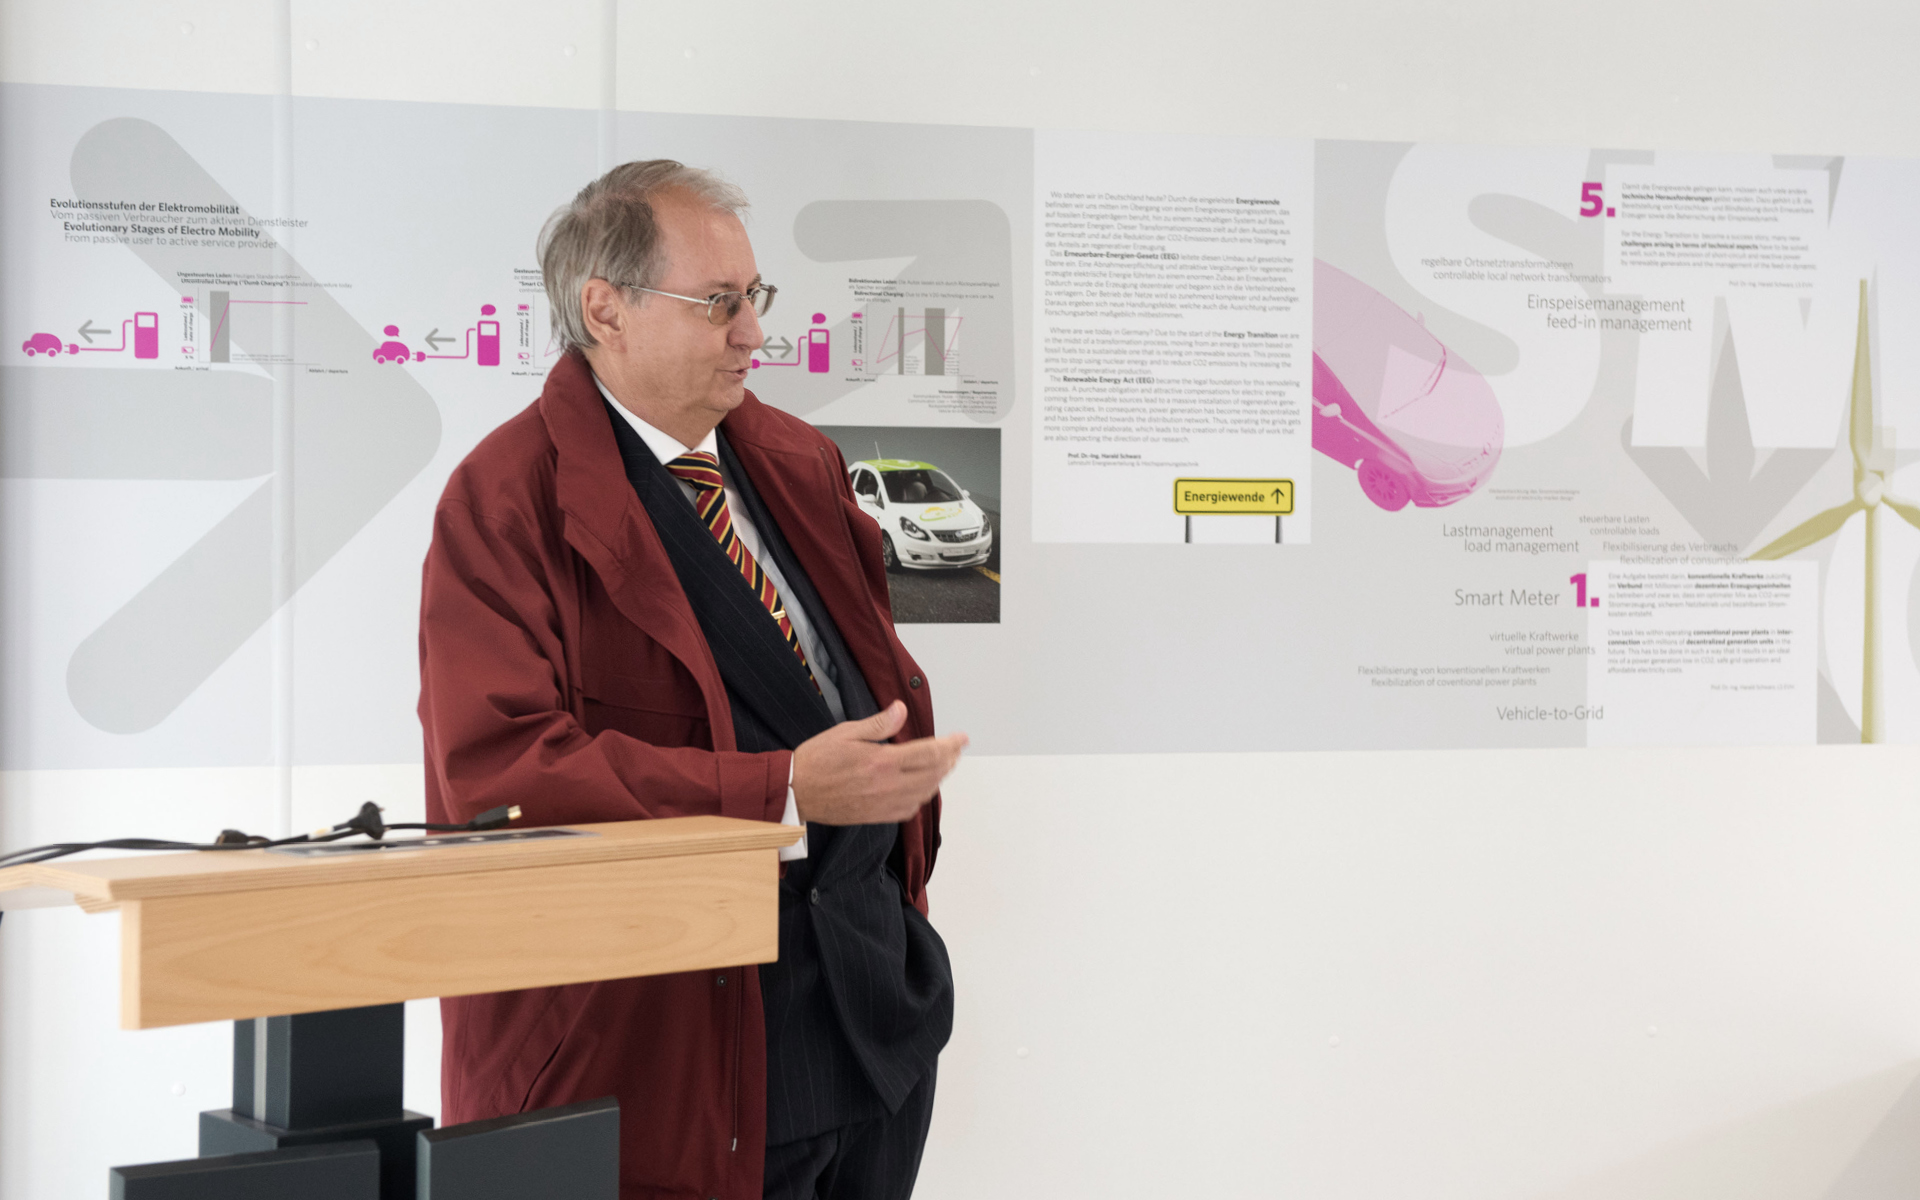 The future of electric vehicle charging is smart and sustainable: Professor Harald Schwarz shows us how